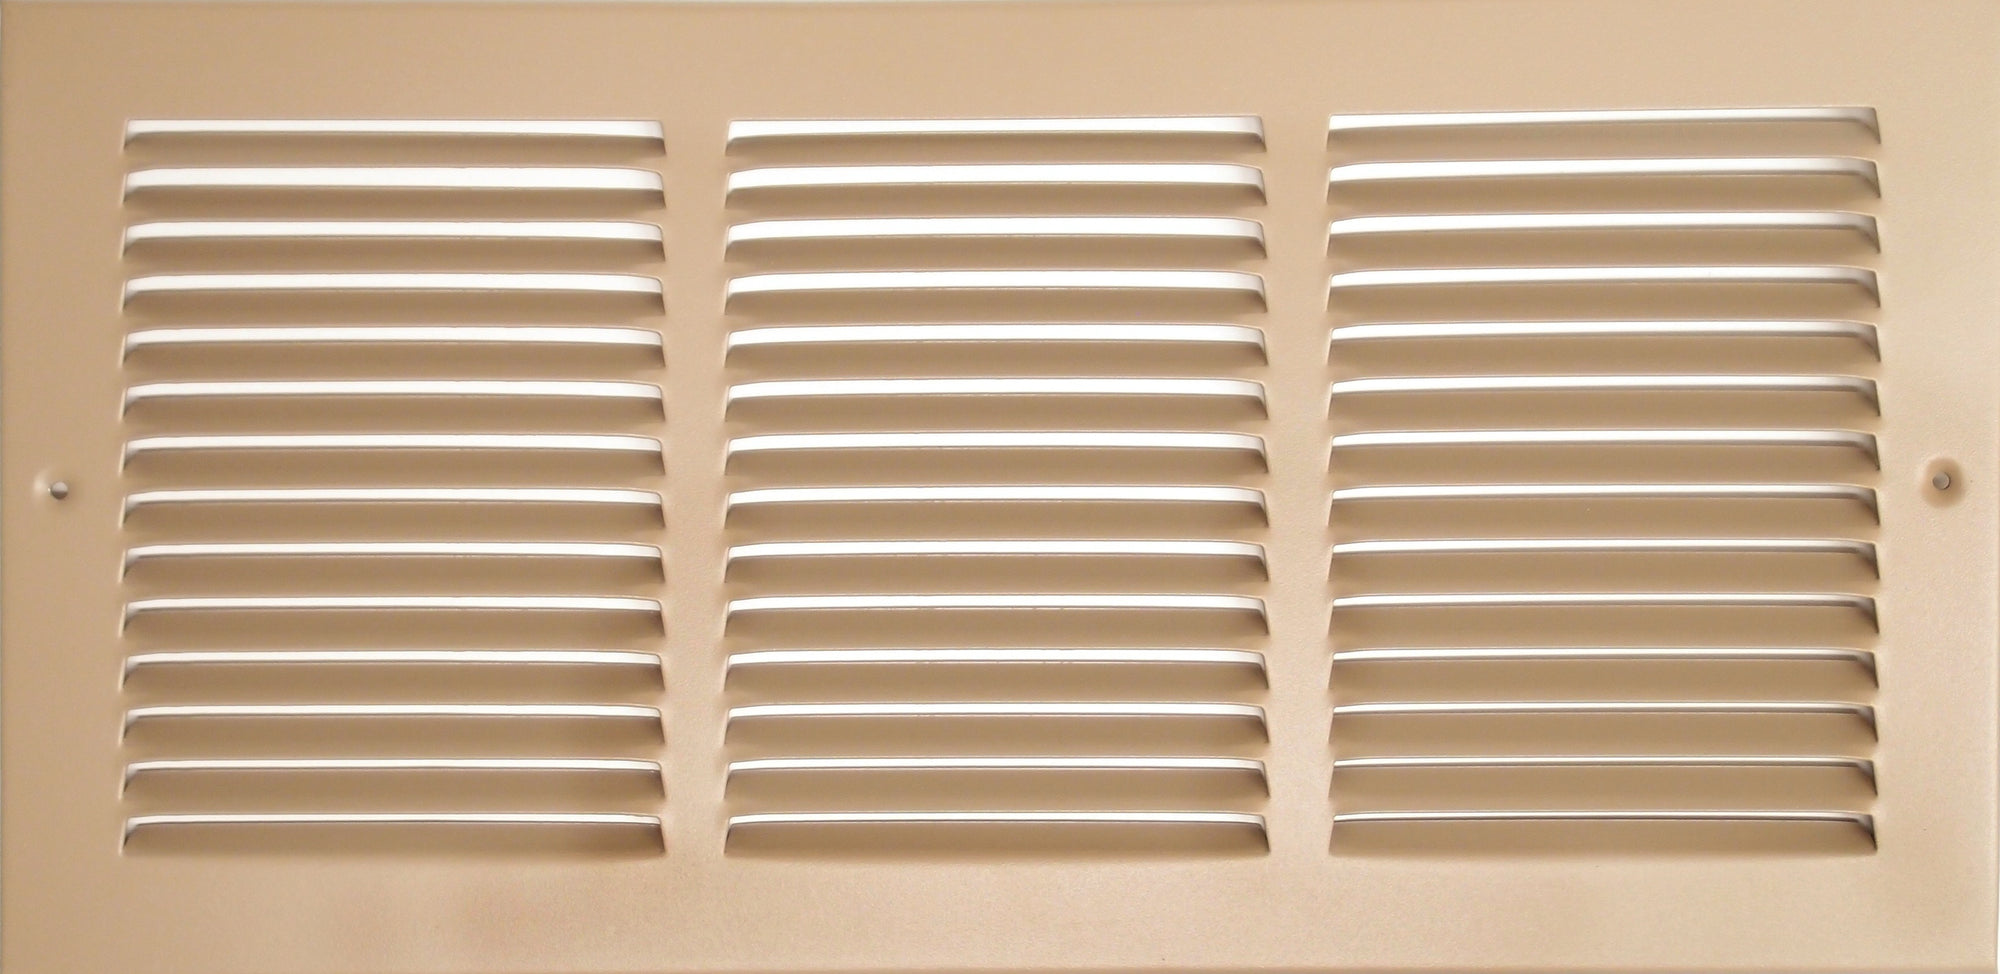 30" X 16" Air Vent Return Grilles - Sidewall and Ceiling - Steel